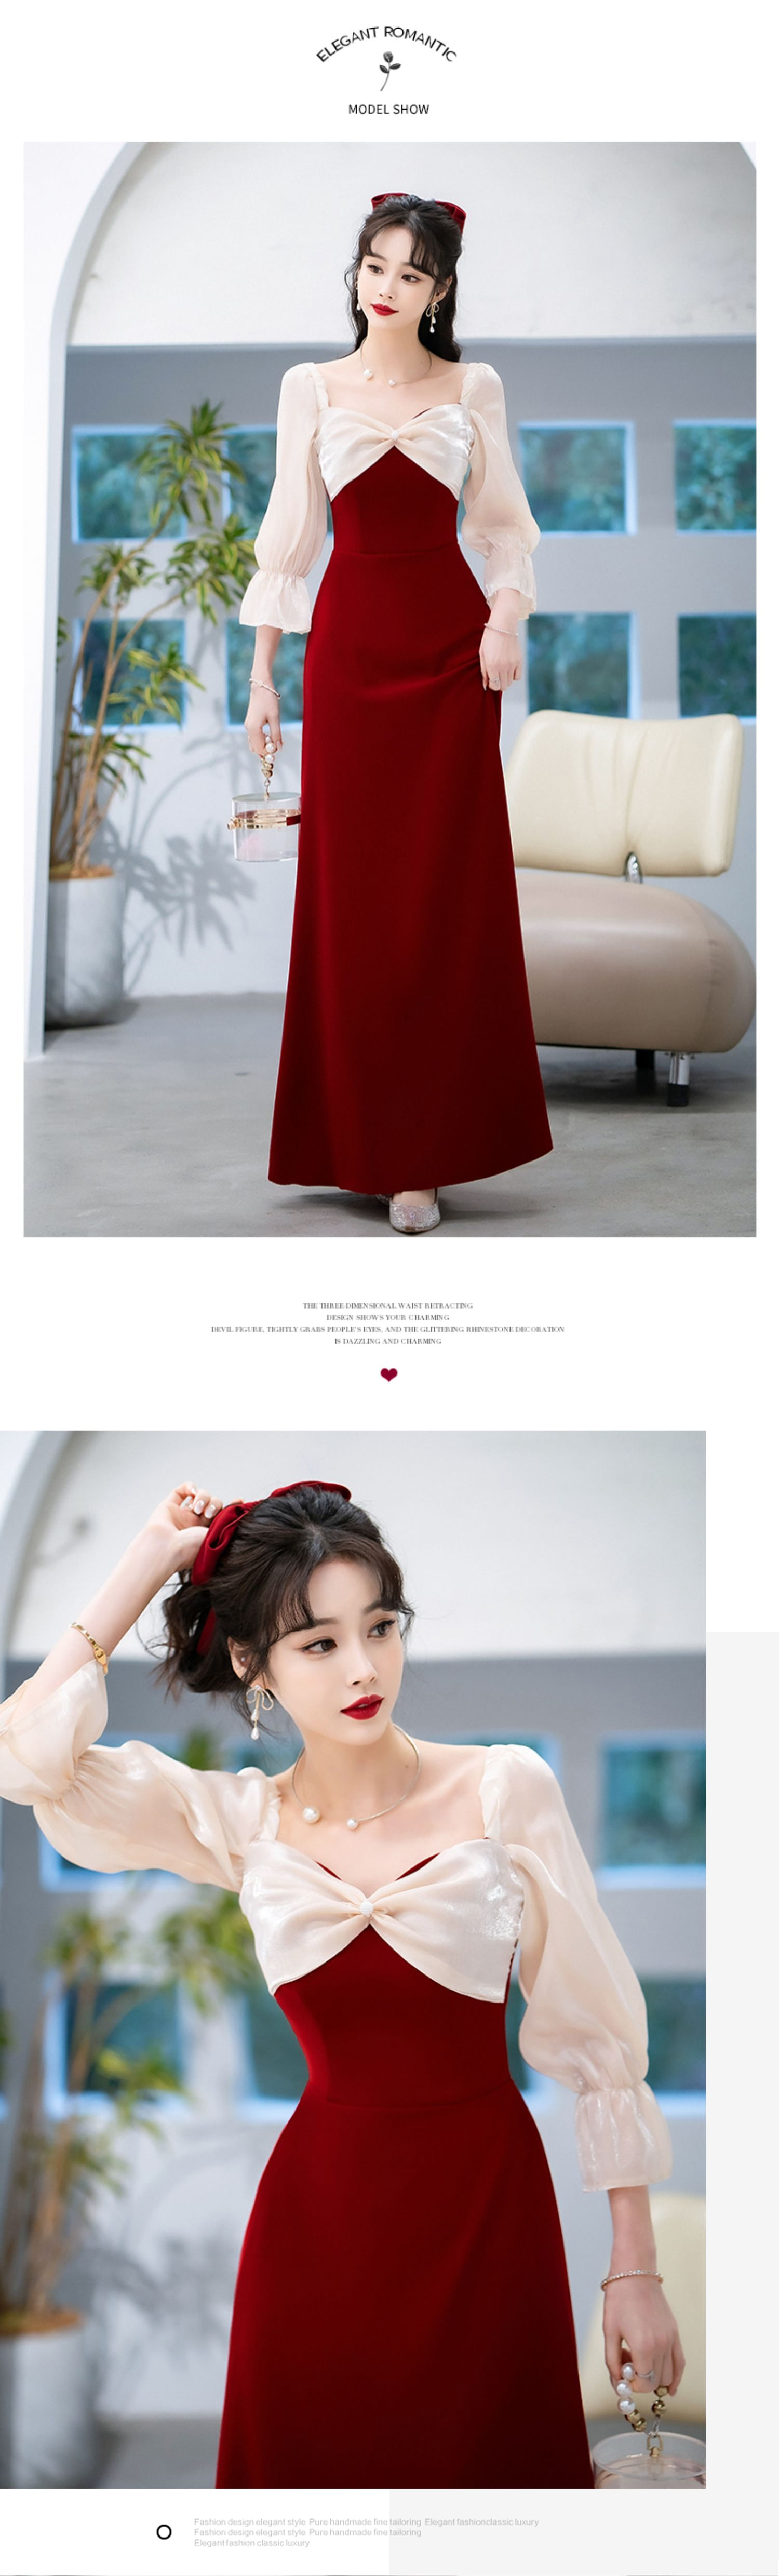 Burgundy-Long-Sleeve-Homecoming-Prom-Evening-Party-Long-Dress10